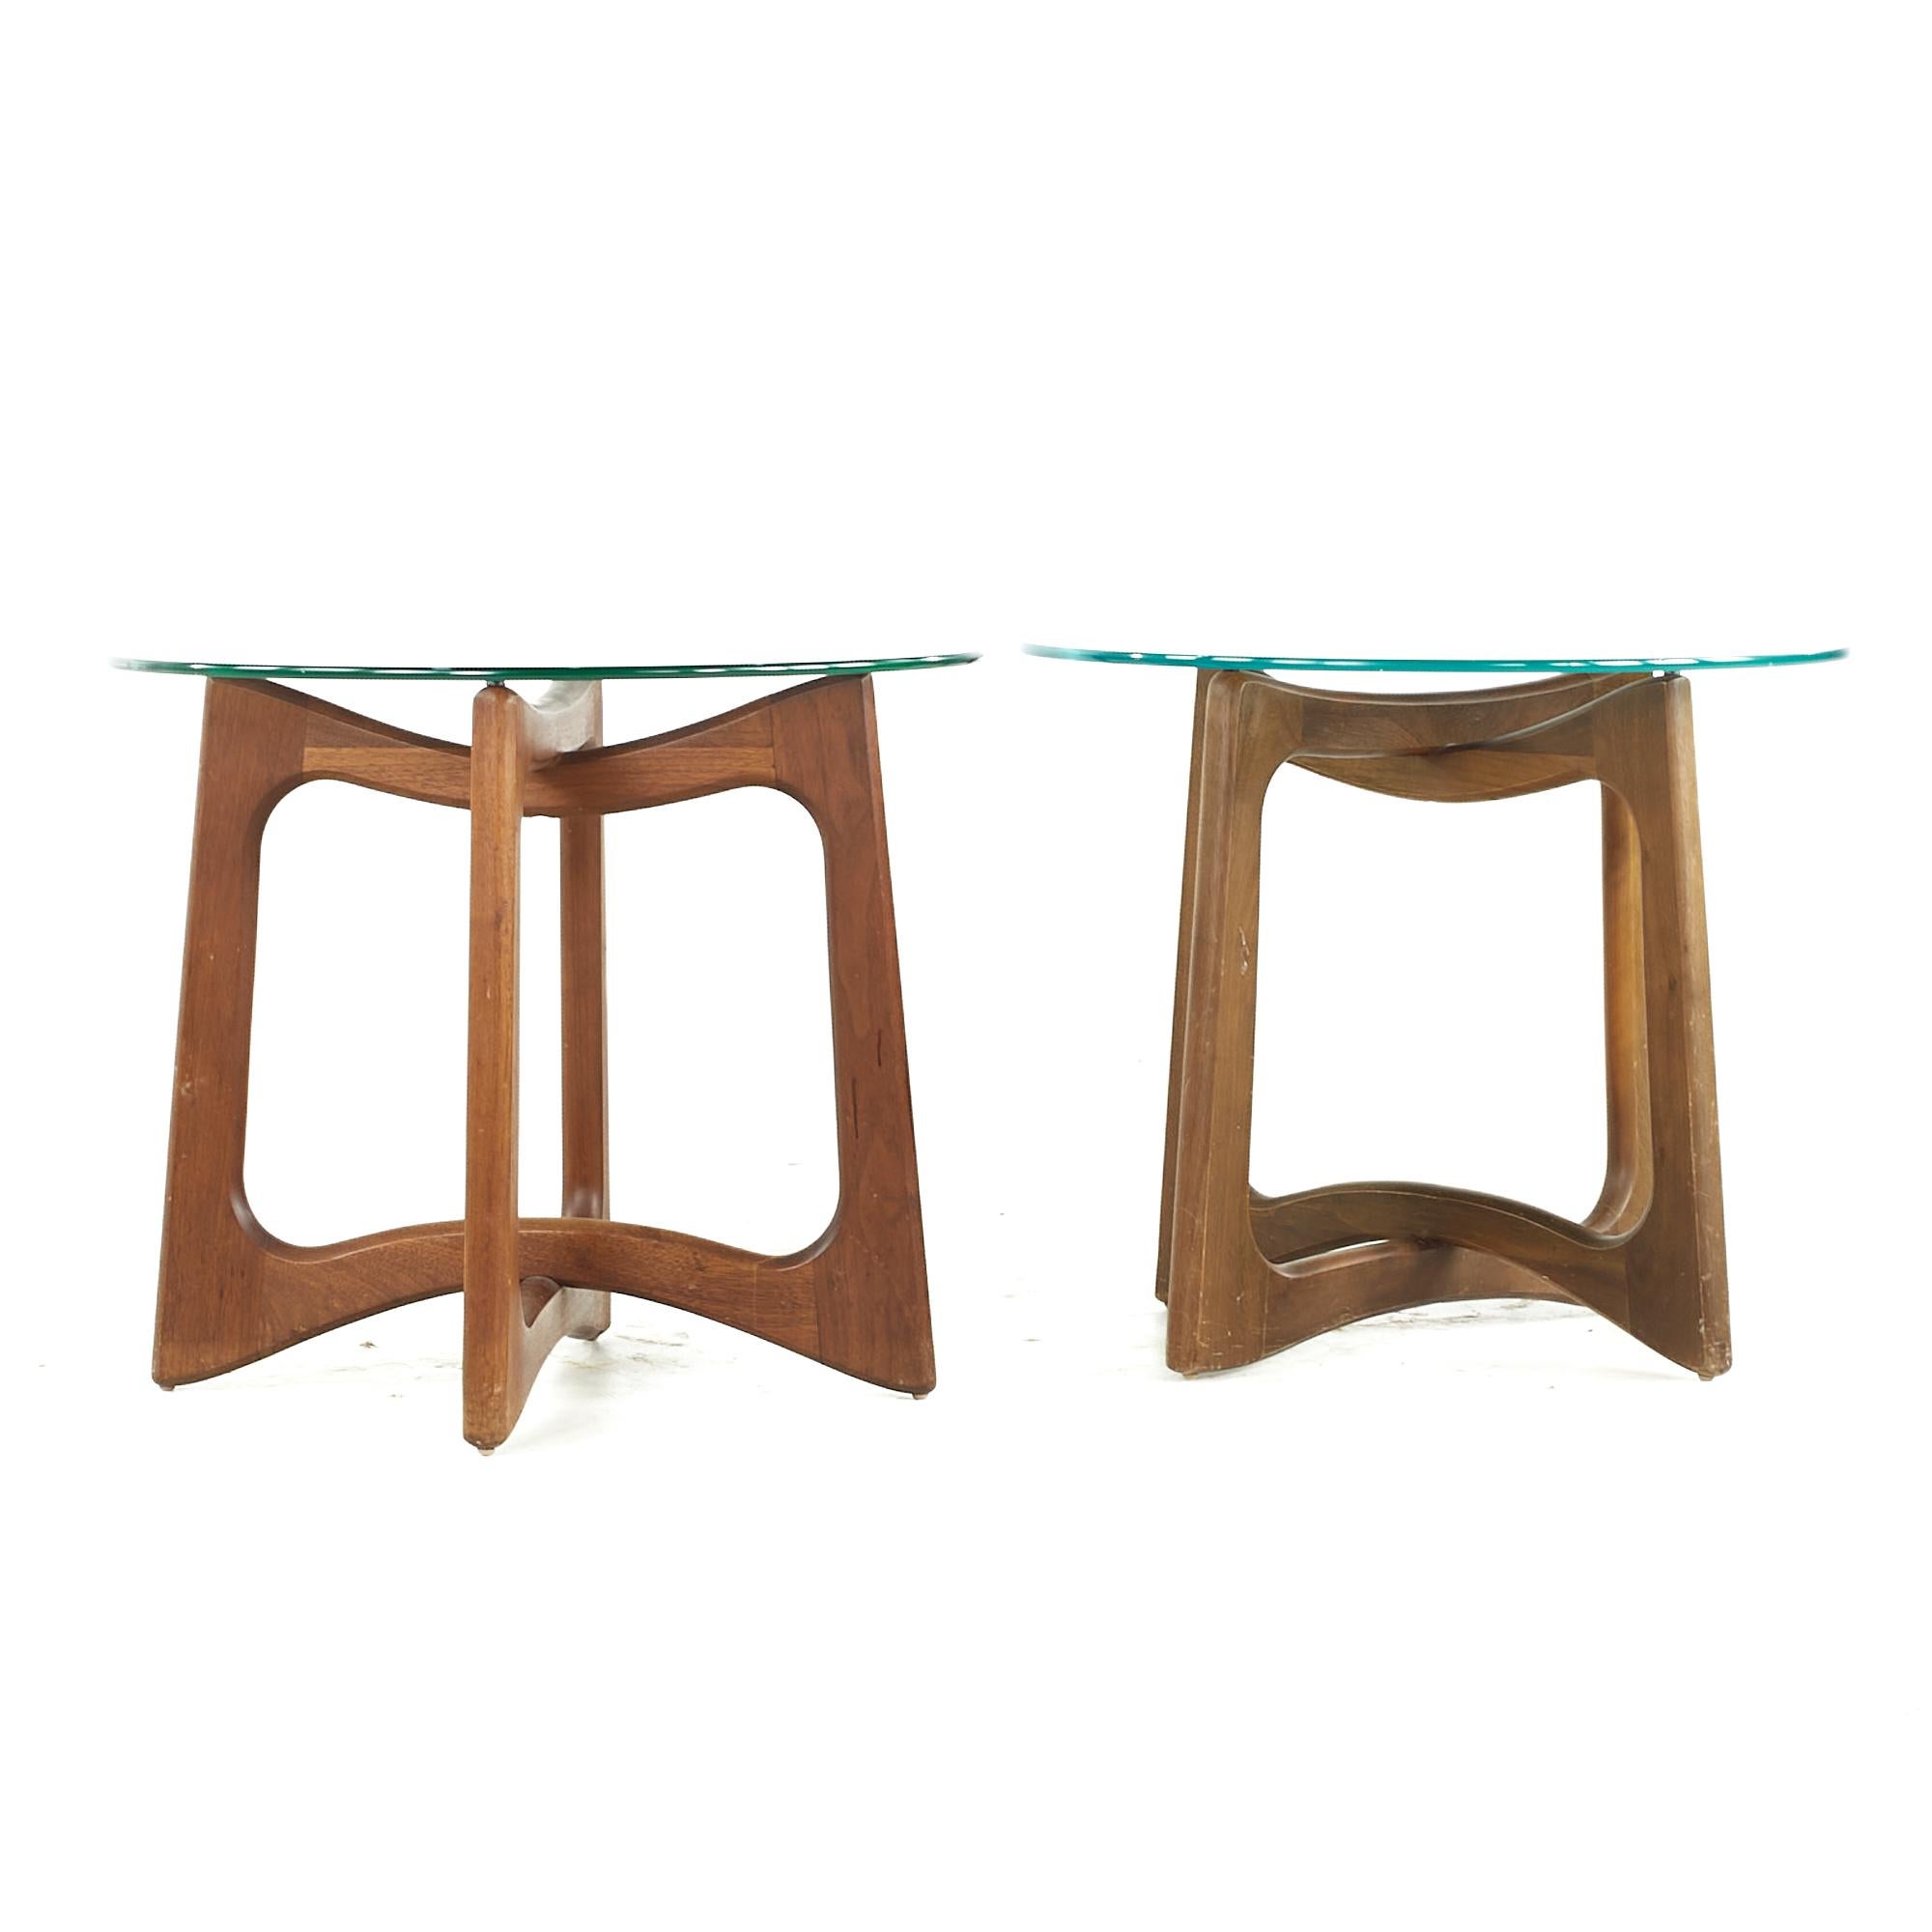 Adrian Pearsall midcentury Walnut and Glass Side Tables - Pair

Each side table measures: 24 wide x 24 deep x 20.25 inches high

All pieces of furniture can be had in what we call restored vintage condition. That means the piece is restored upon